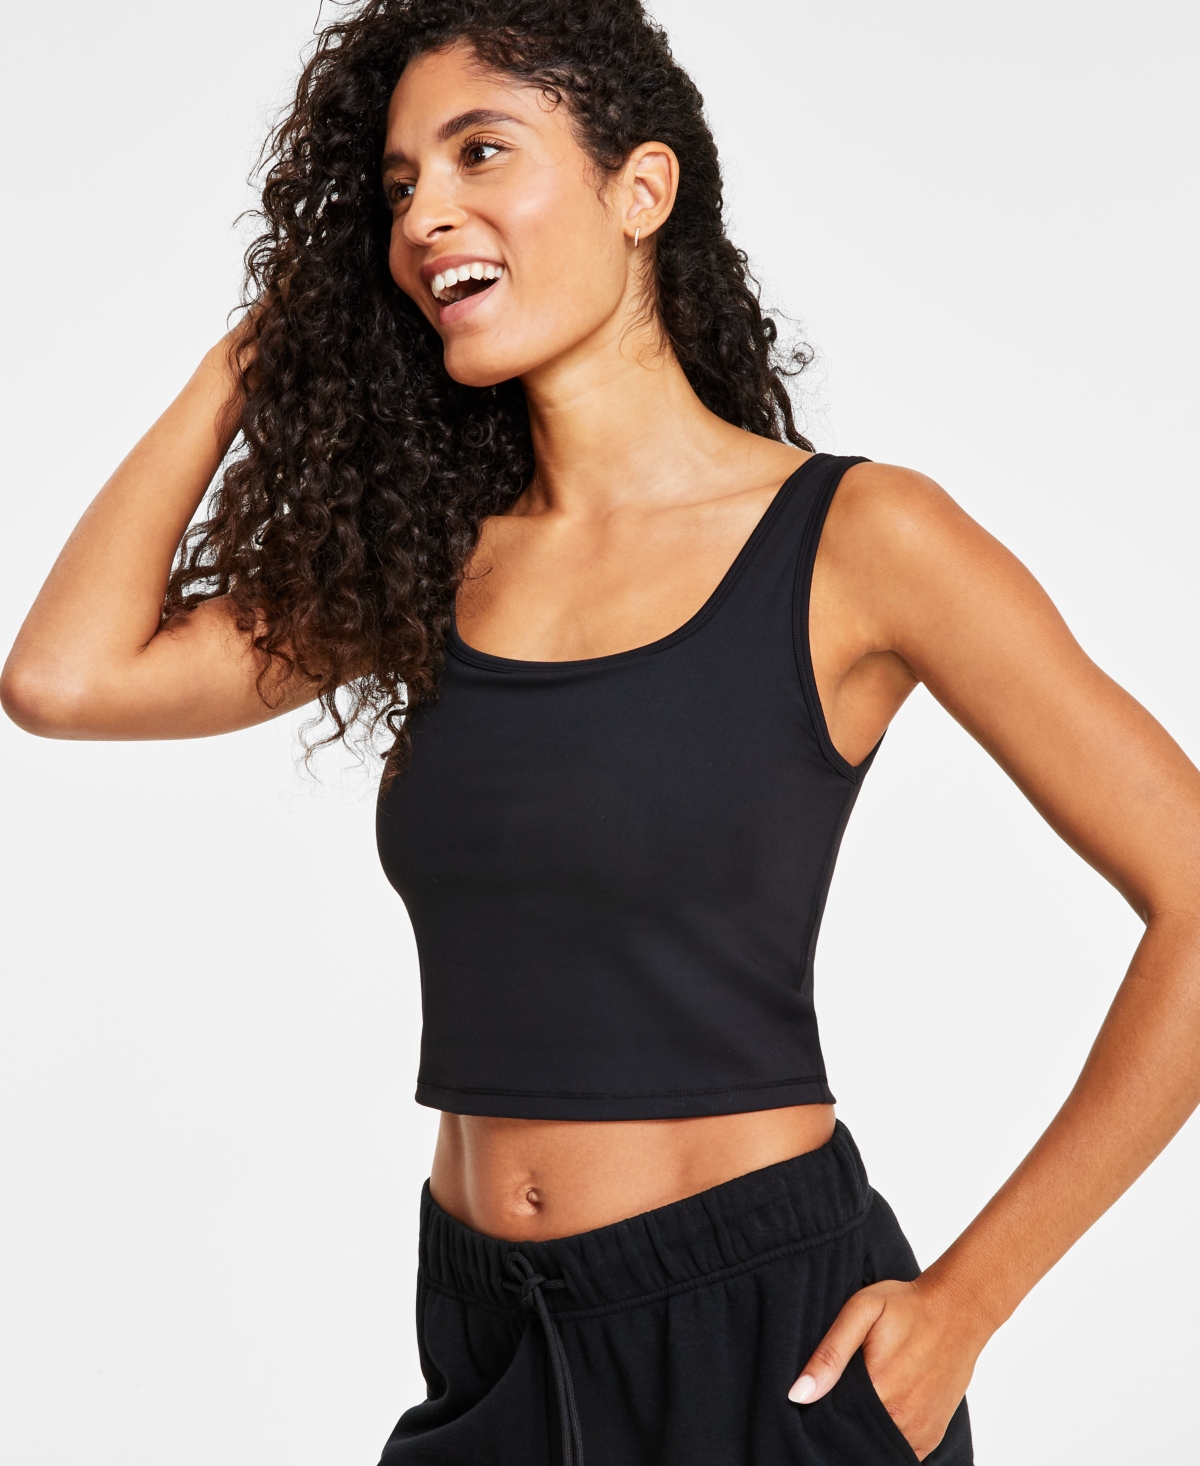 Women's Cropped Tank Top, Created for Macy's - Deep Charcoal